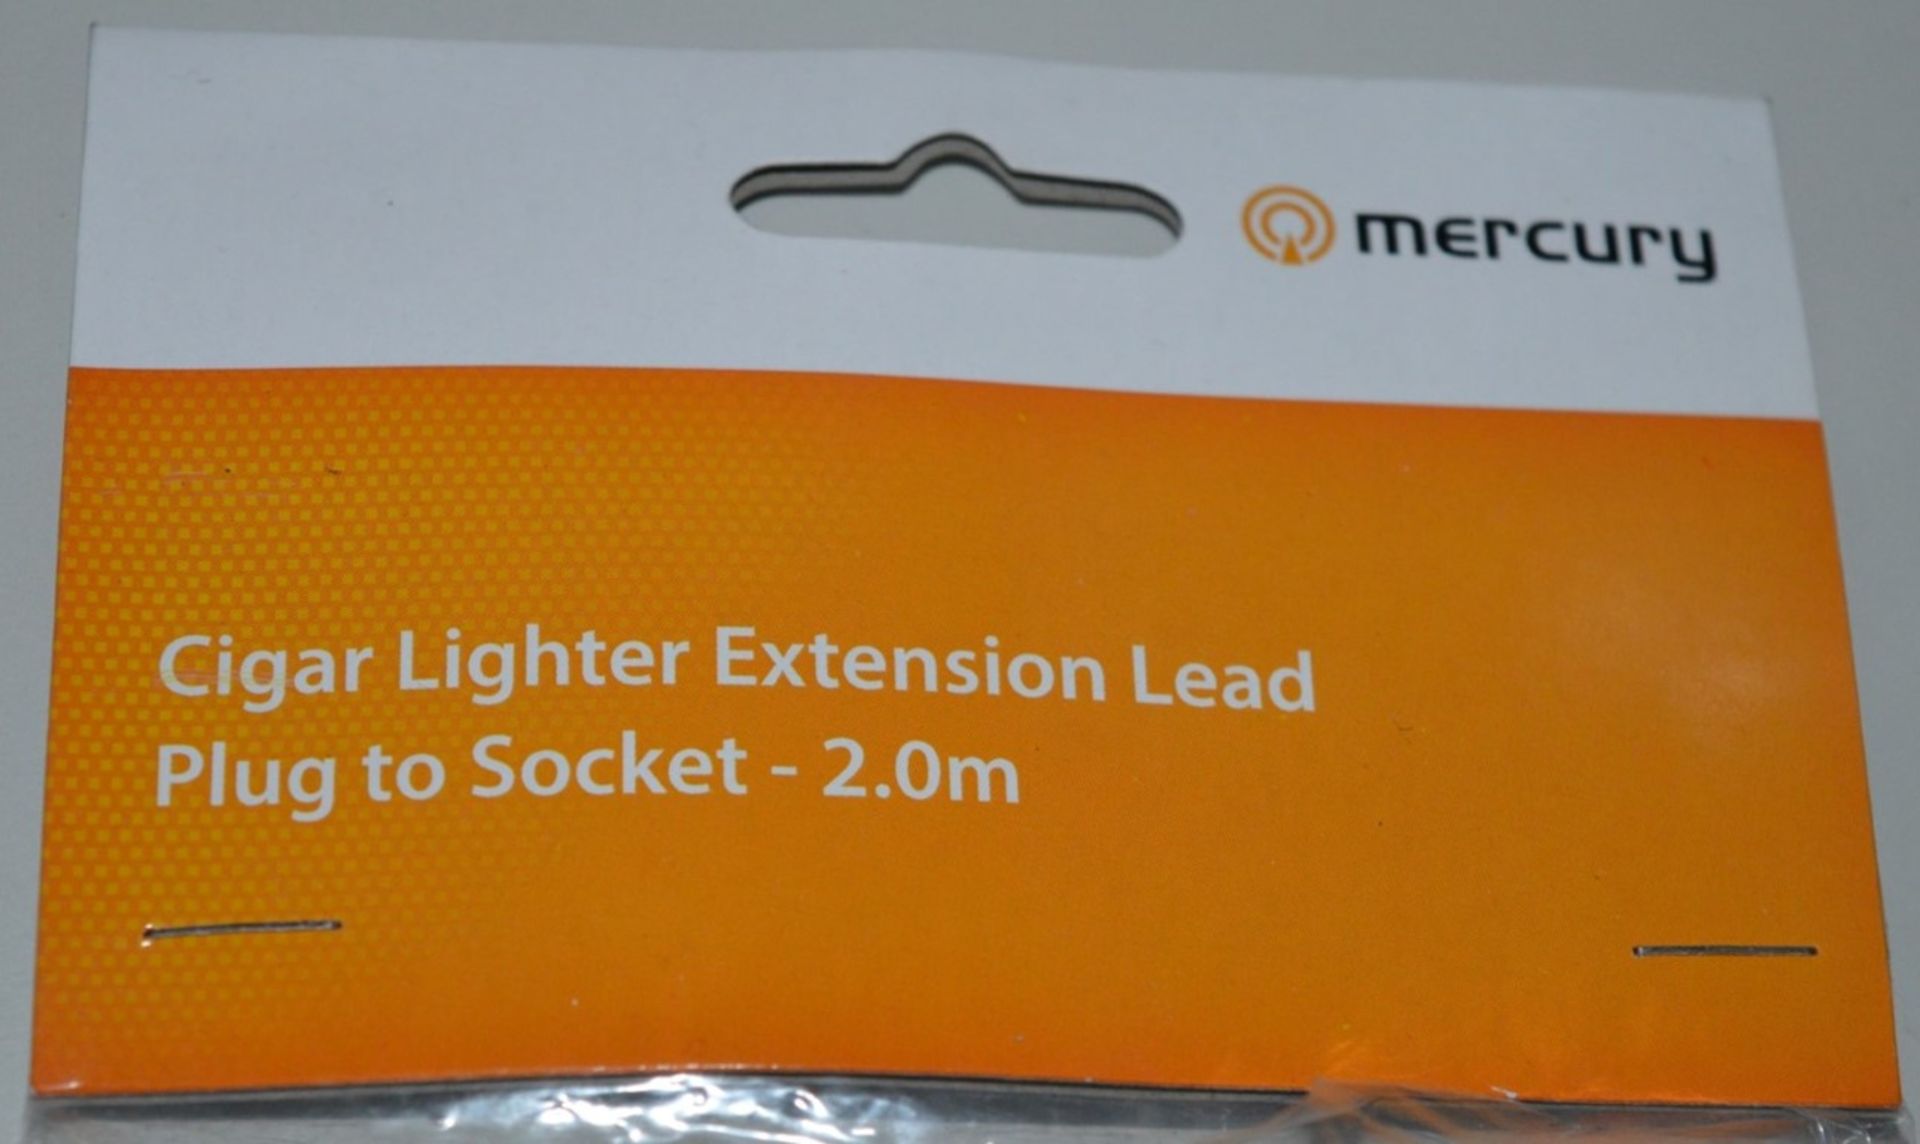 14 x Mercury Cigar Lighter Extension Plug to Socket Leads - 2.0m - Fused FAS 6 x 32MM - With LED - Image 2 of 5